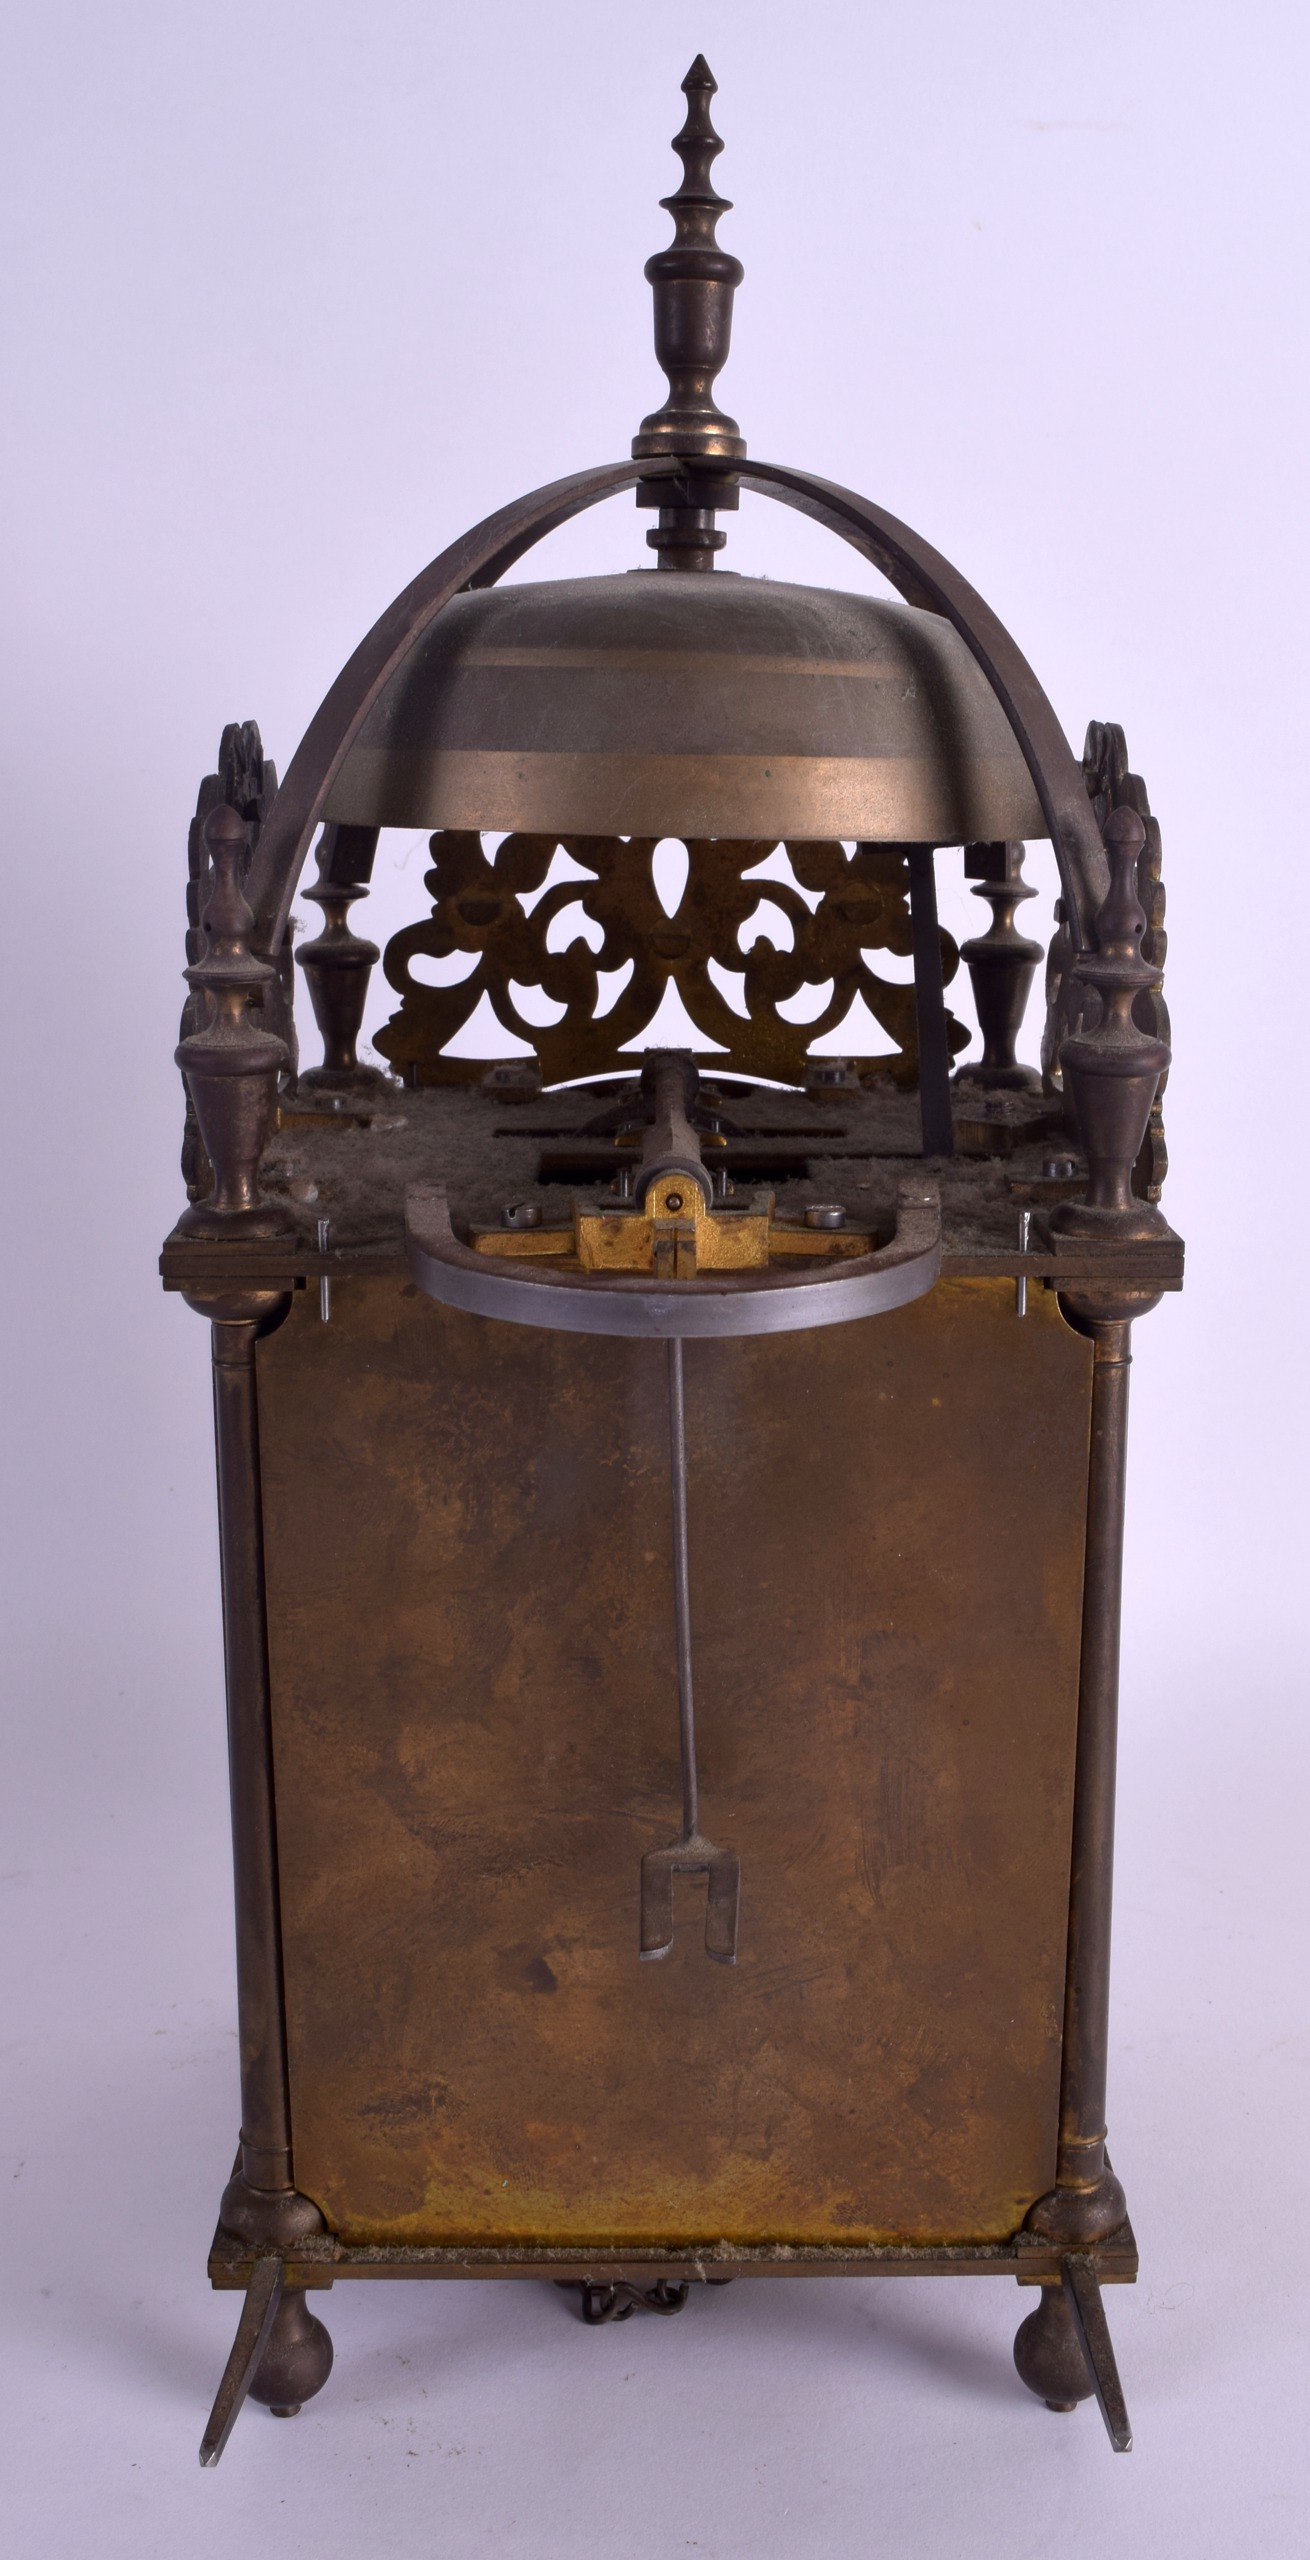 A BRASS LANTERN CLOCK by Thomas Moore of Ipswich, decorated with open work foliage. 37 cm x 15 cm. - Image 5 of 6